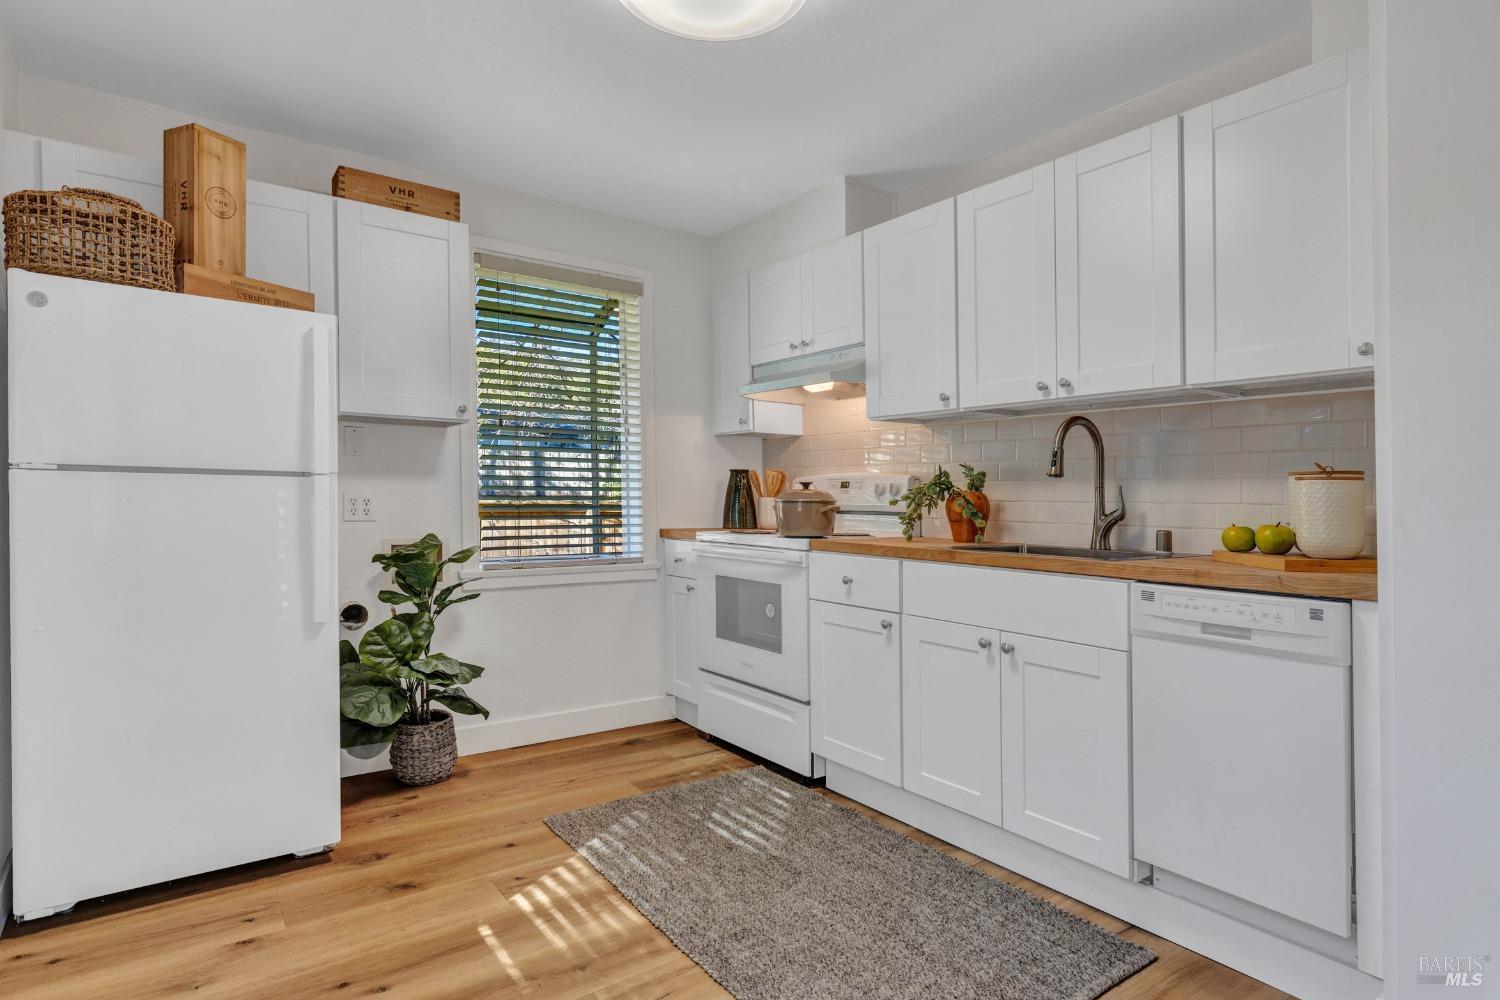 a kitchen with white cabinets and wooden floor